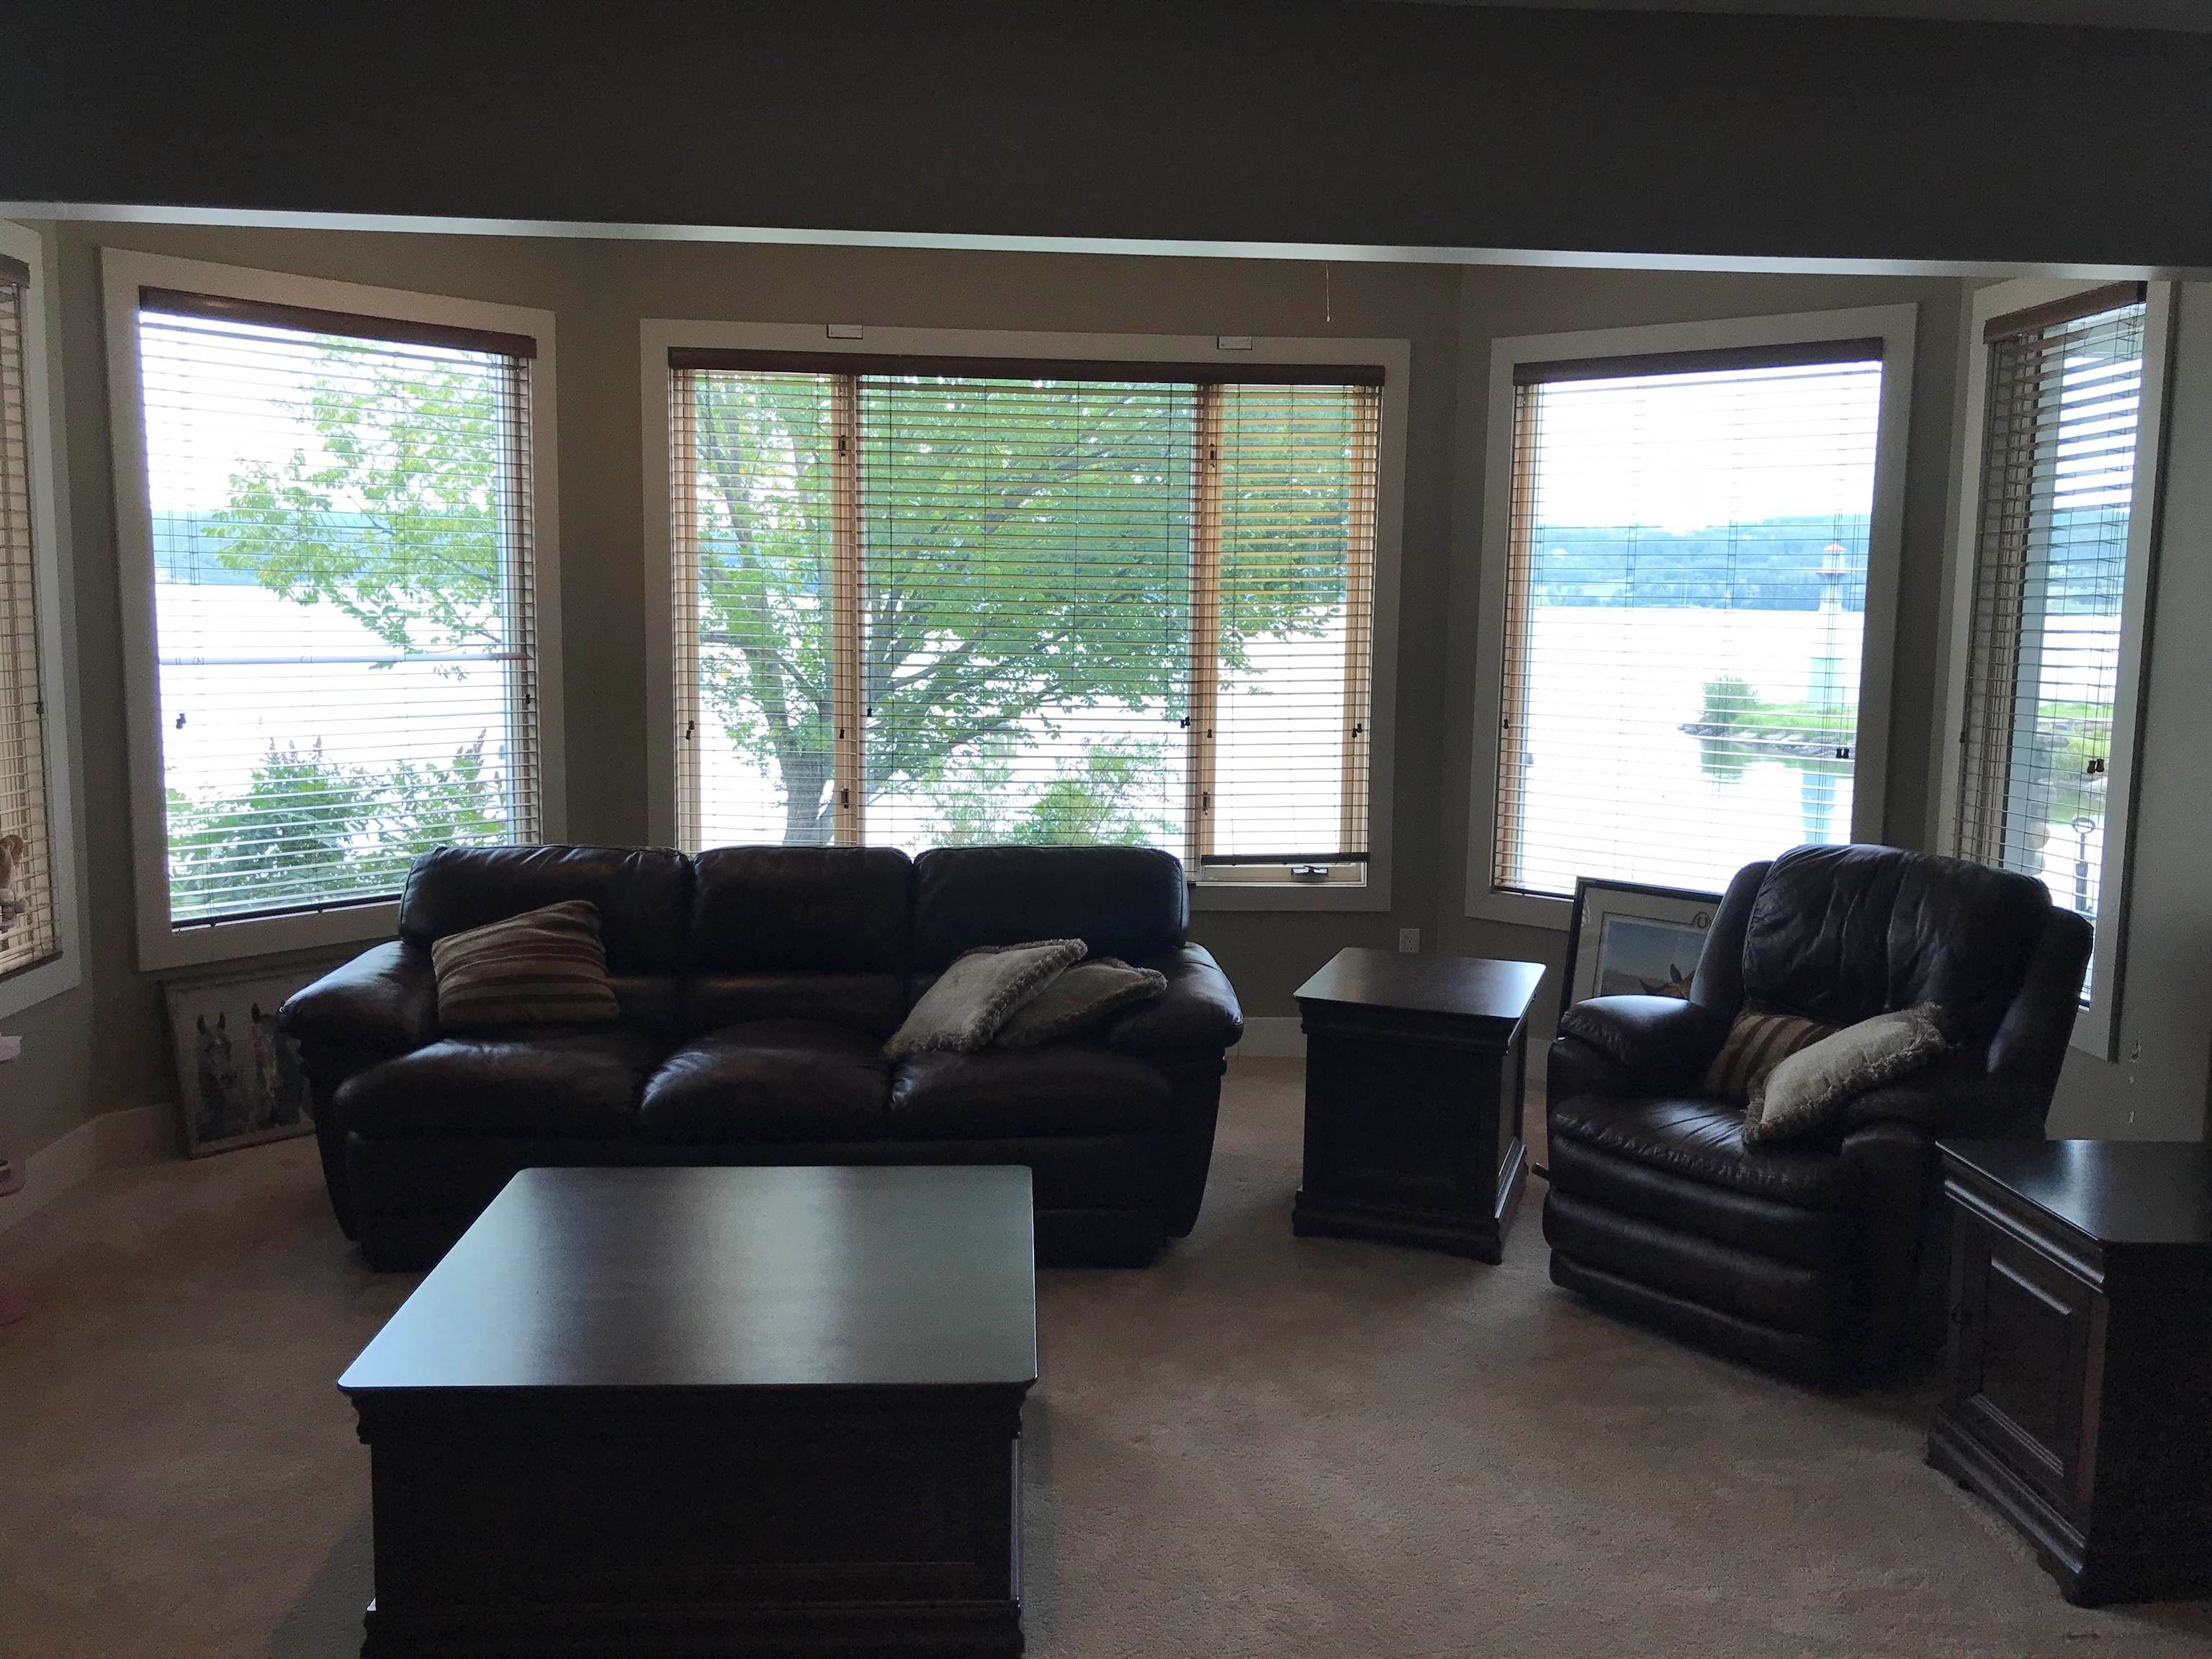 Photo 27: Photos: 13134 LAKESHORE Drive: Charlie Lake House for sale (Fort St. John (Zone 60))  : MLS®# R2613481